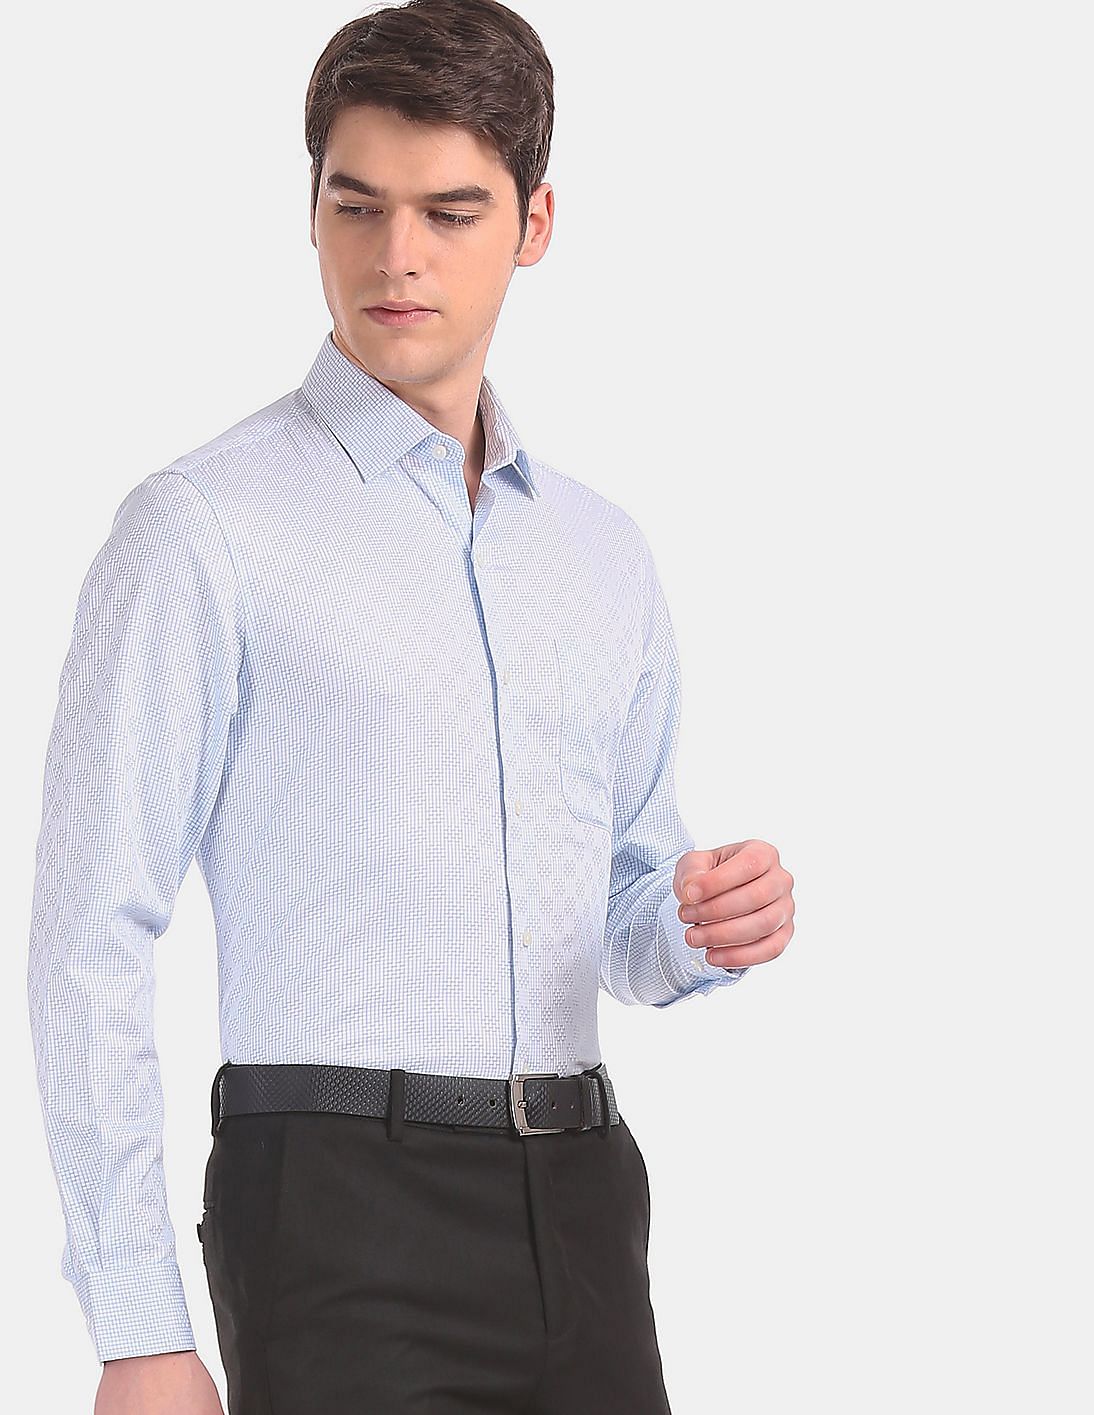 Buy AD by Arvind Regular Fit French Placket Formal Shirt - NNNOW.com